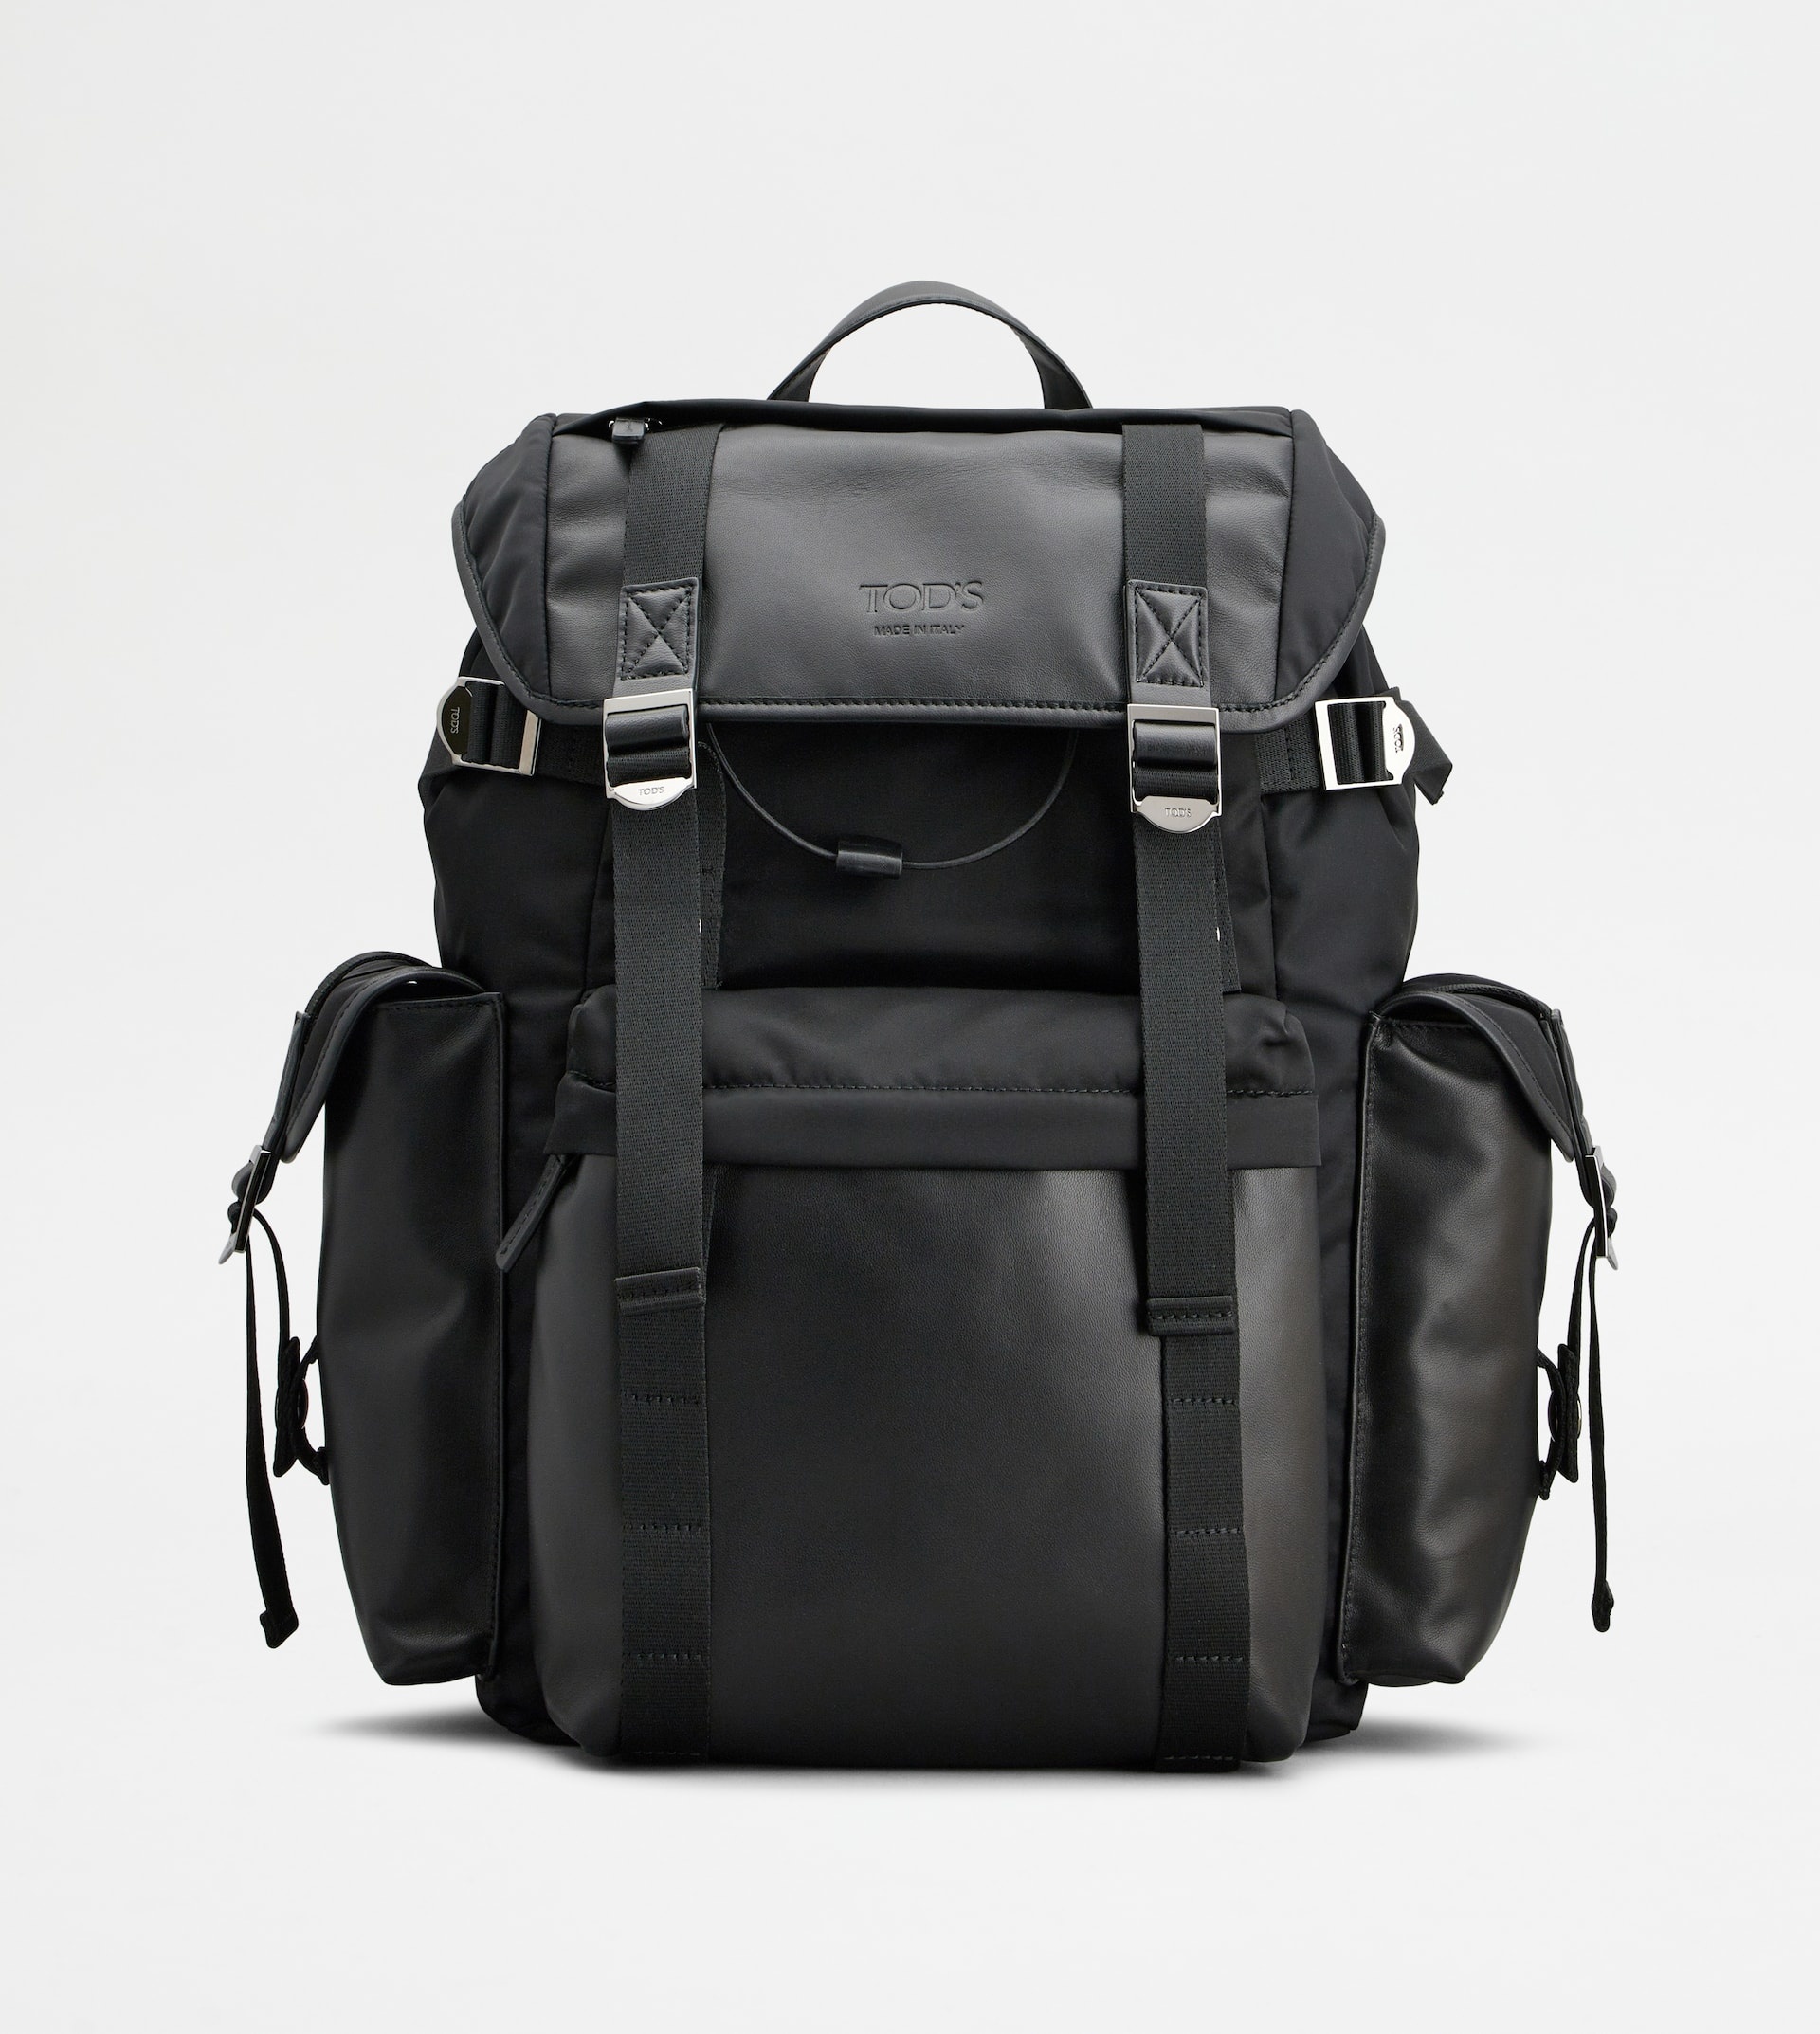 BACKPACK IN FABRIC AND LEATHER MEDIUM - BLACK - 1